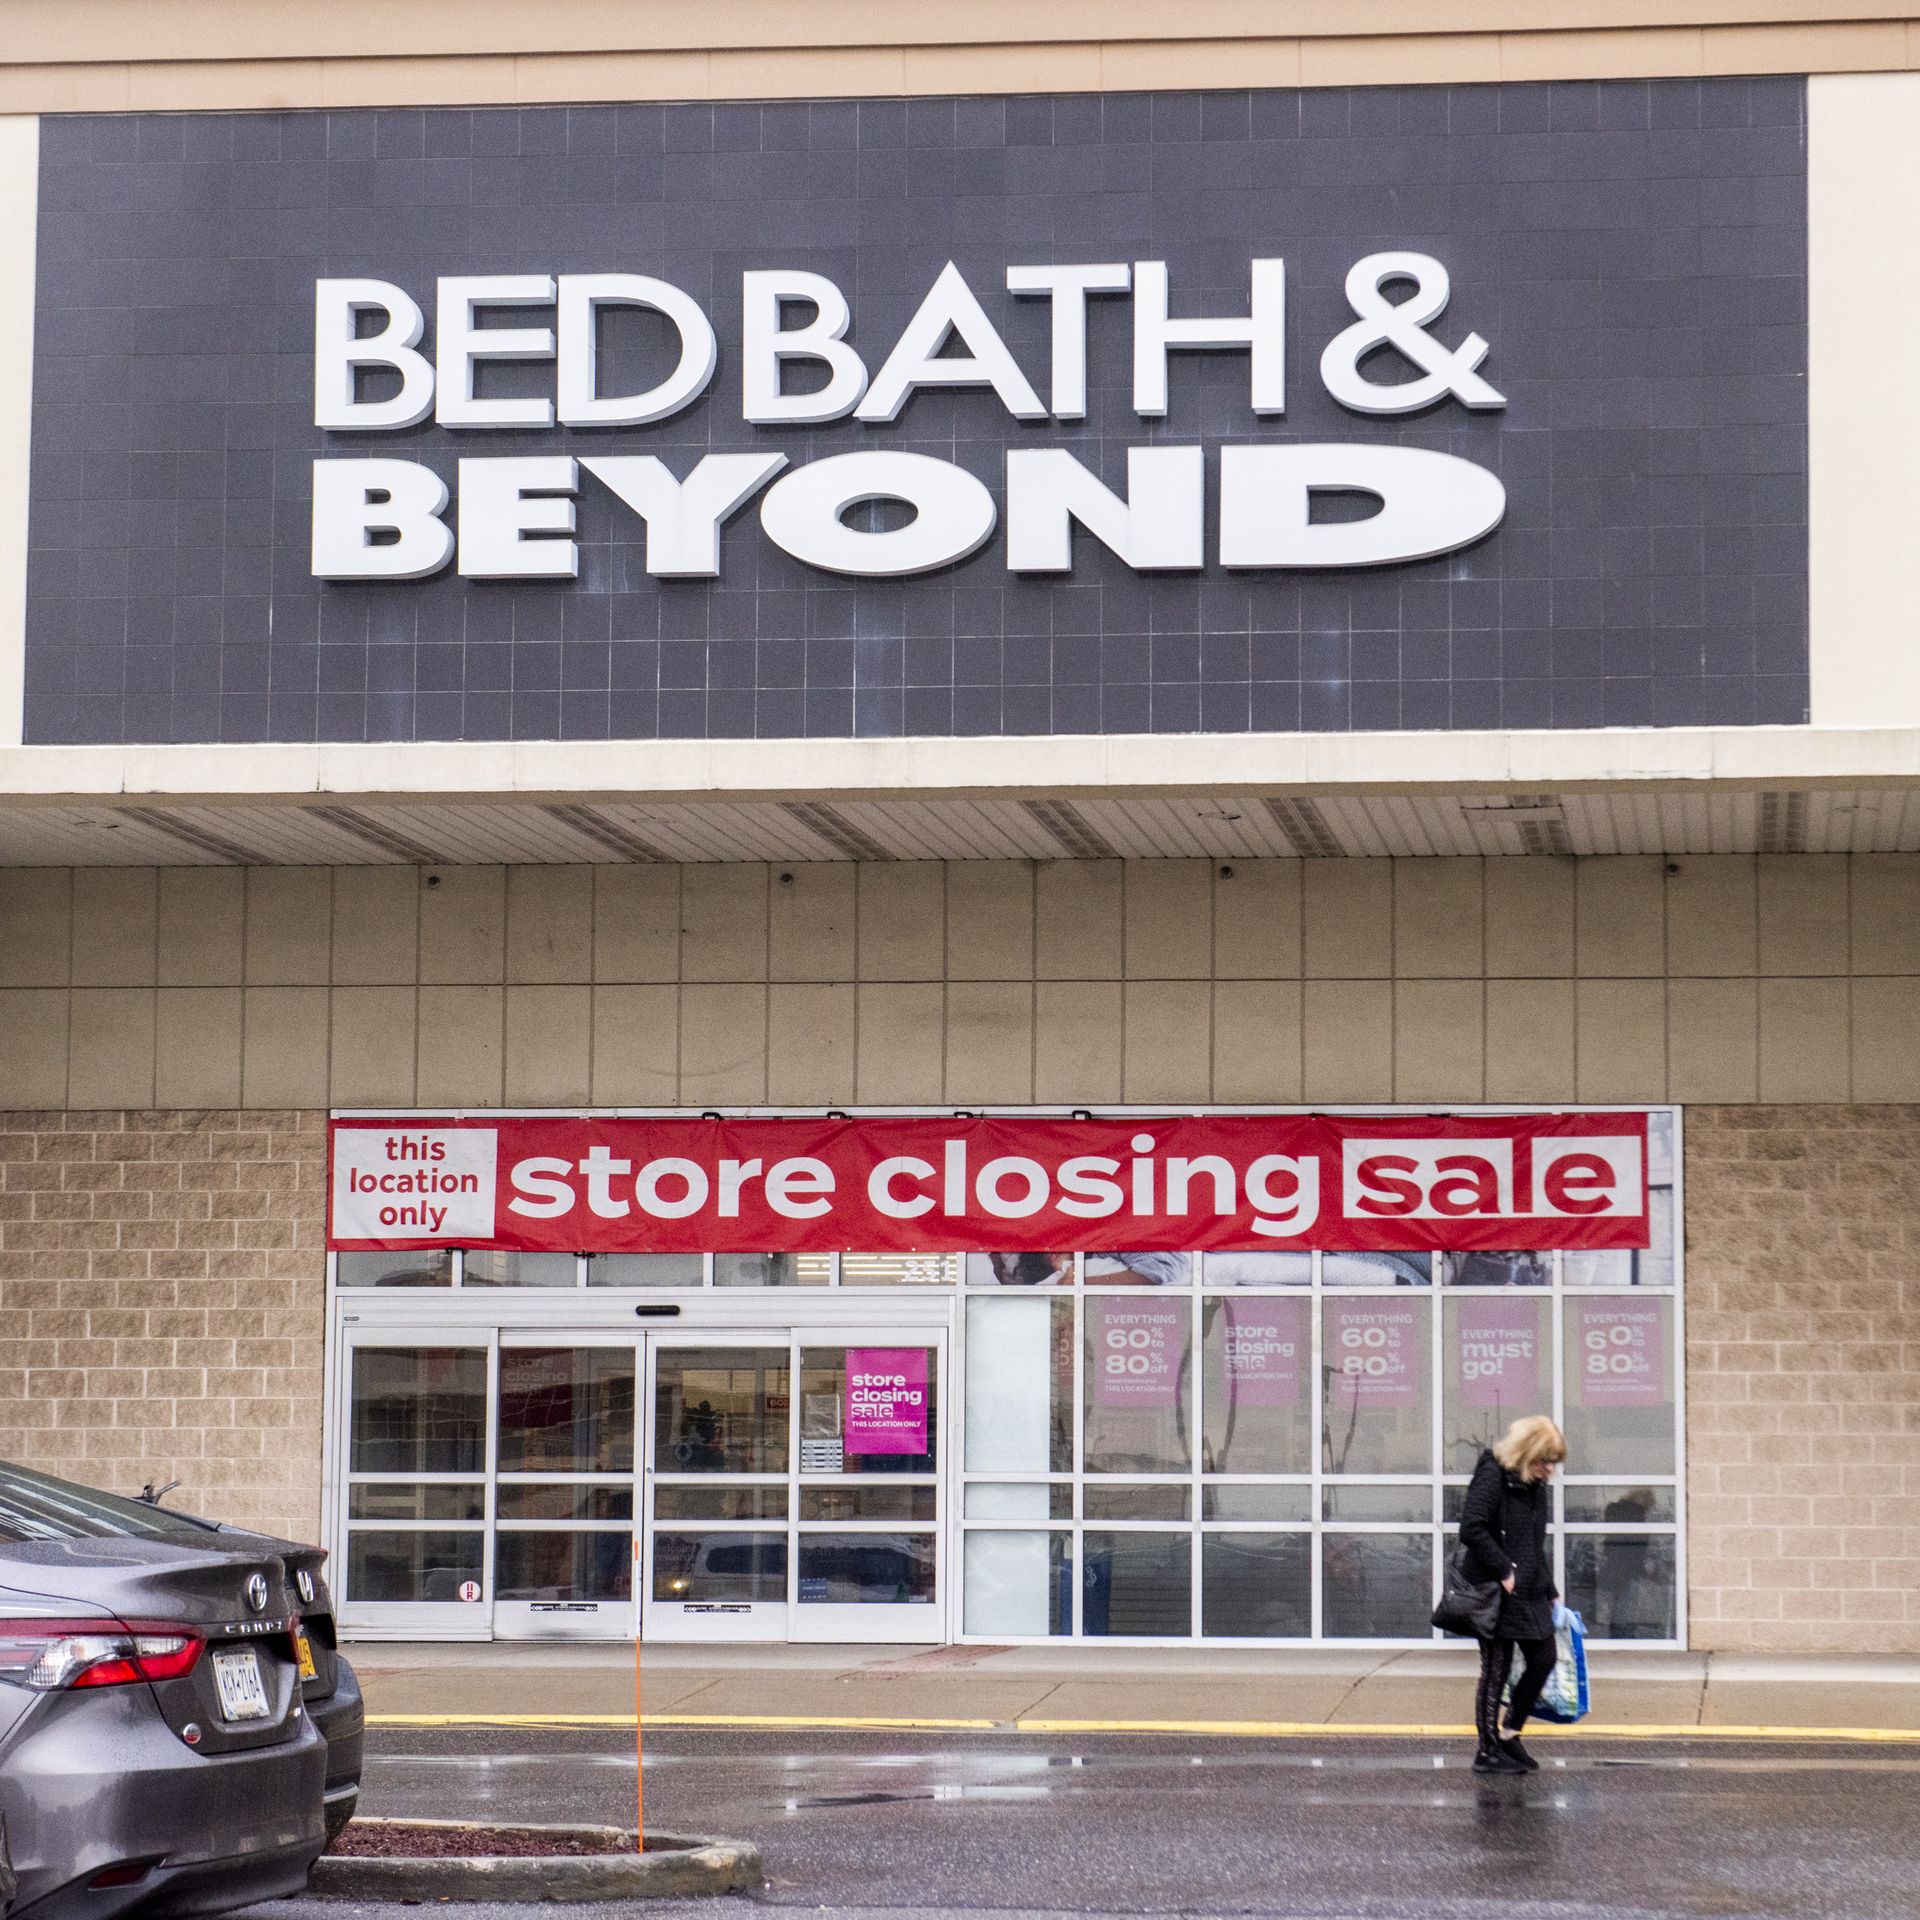 Bed Bath & Beyond kicks off store closing sales after filing for